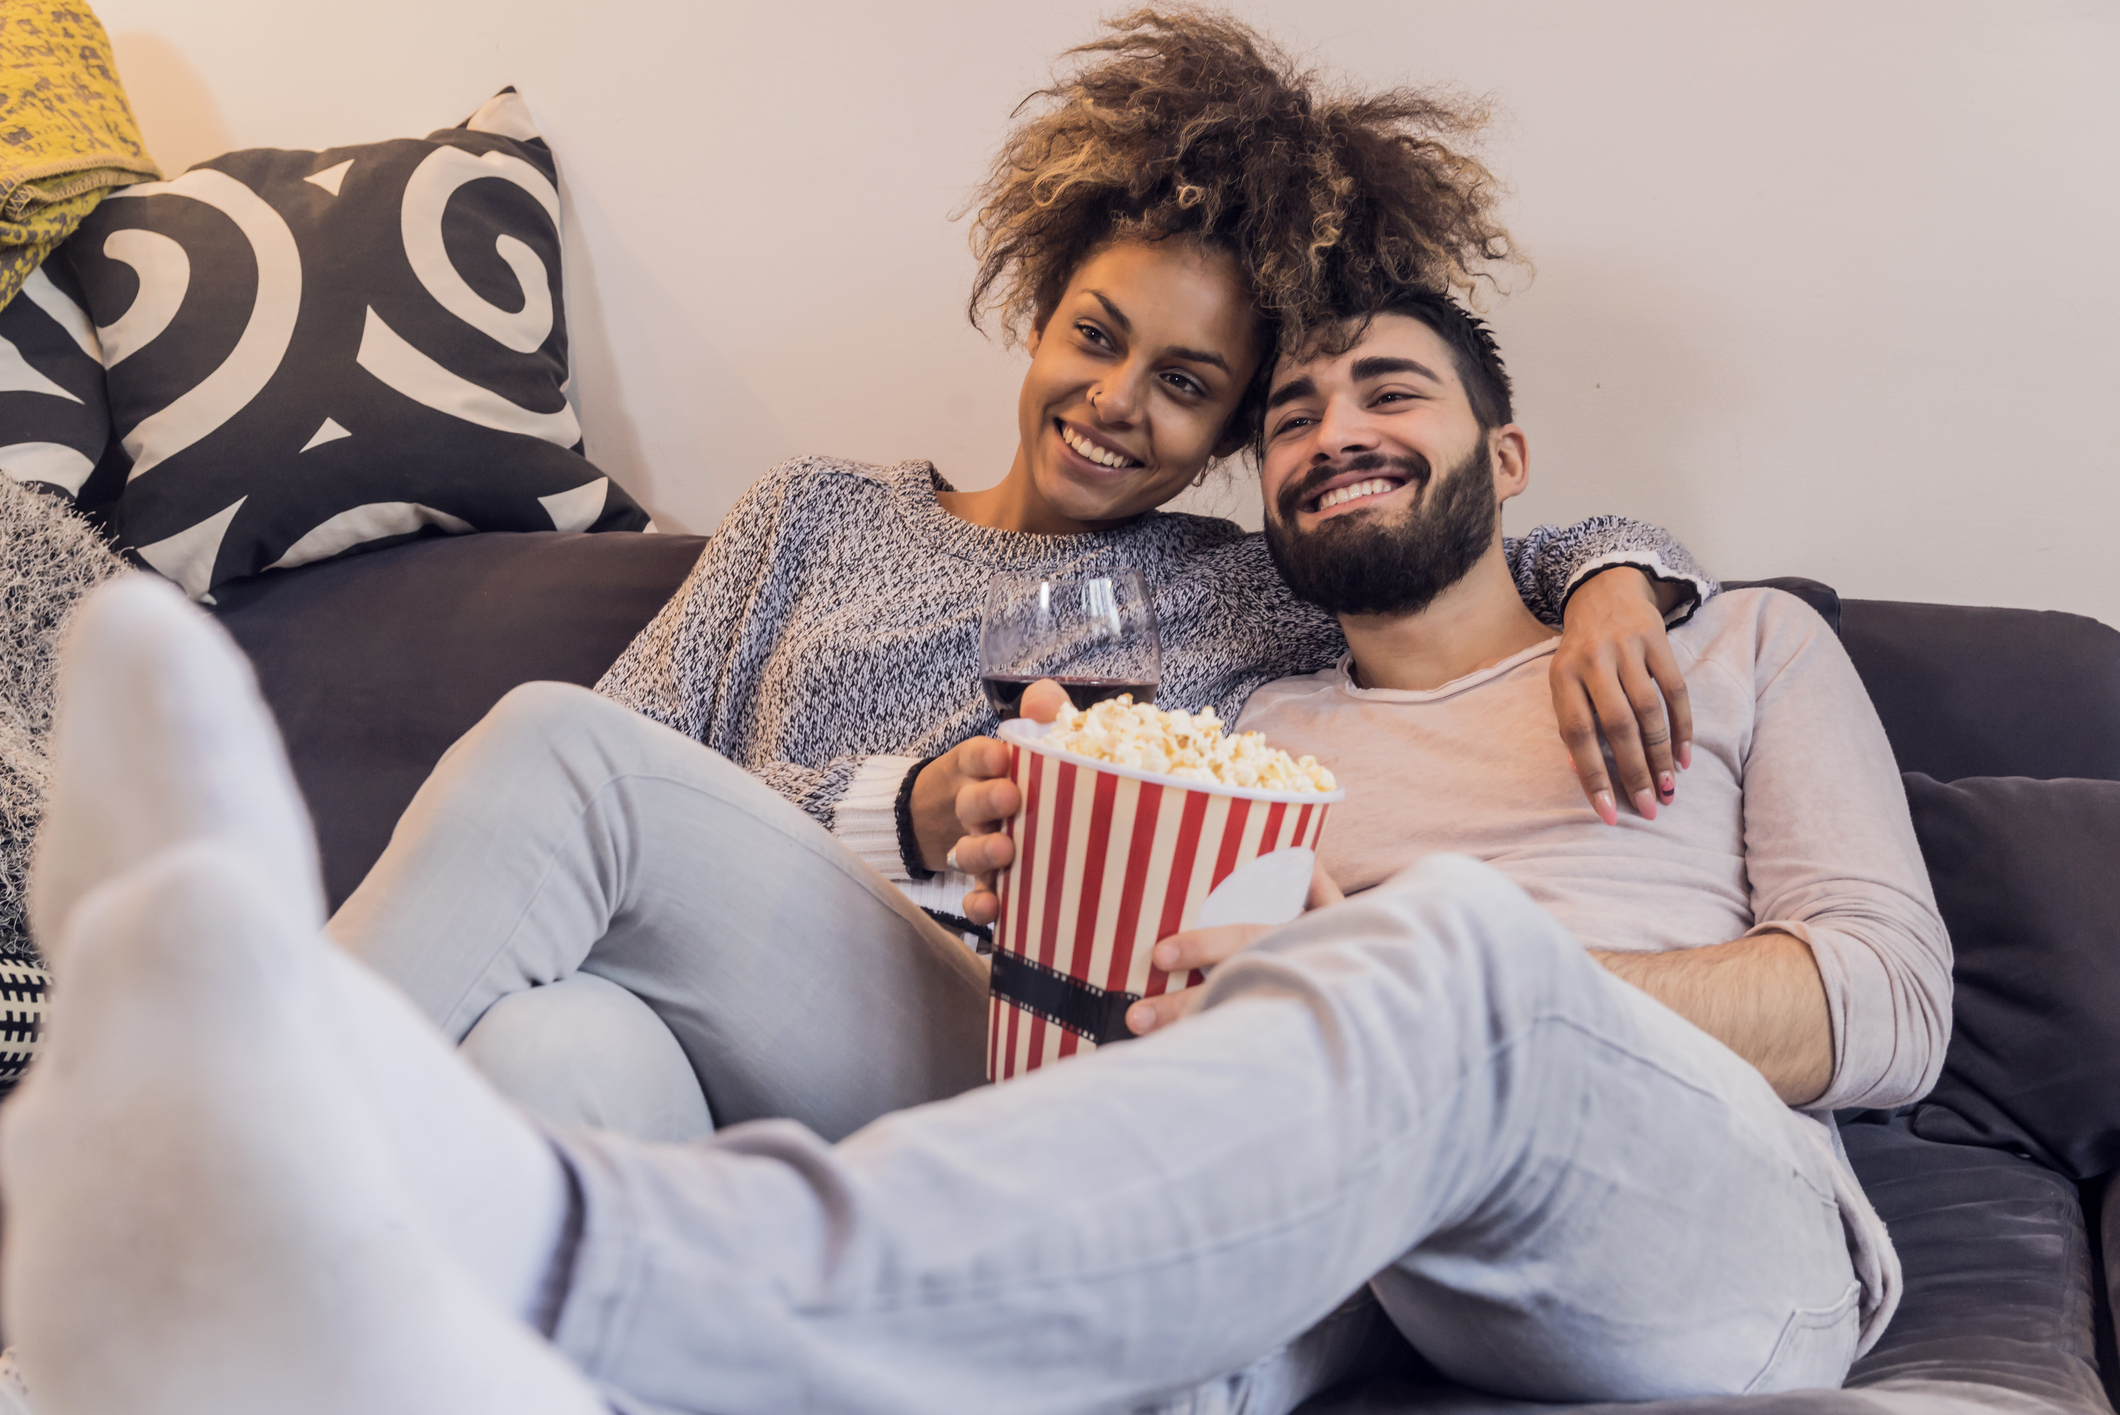 A couple sitting together on a couch sharing popcorn with a relaxed posture